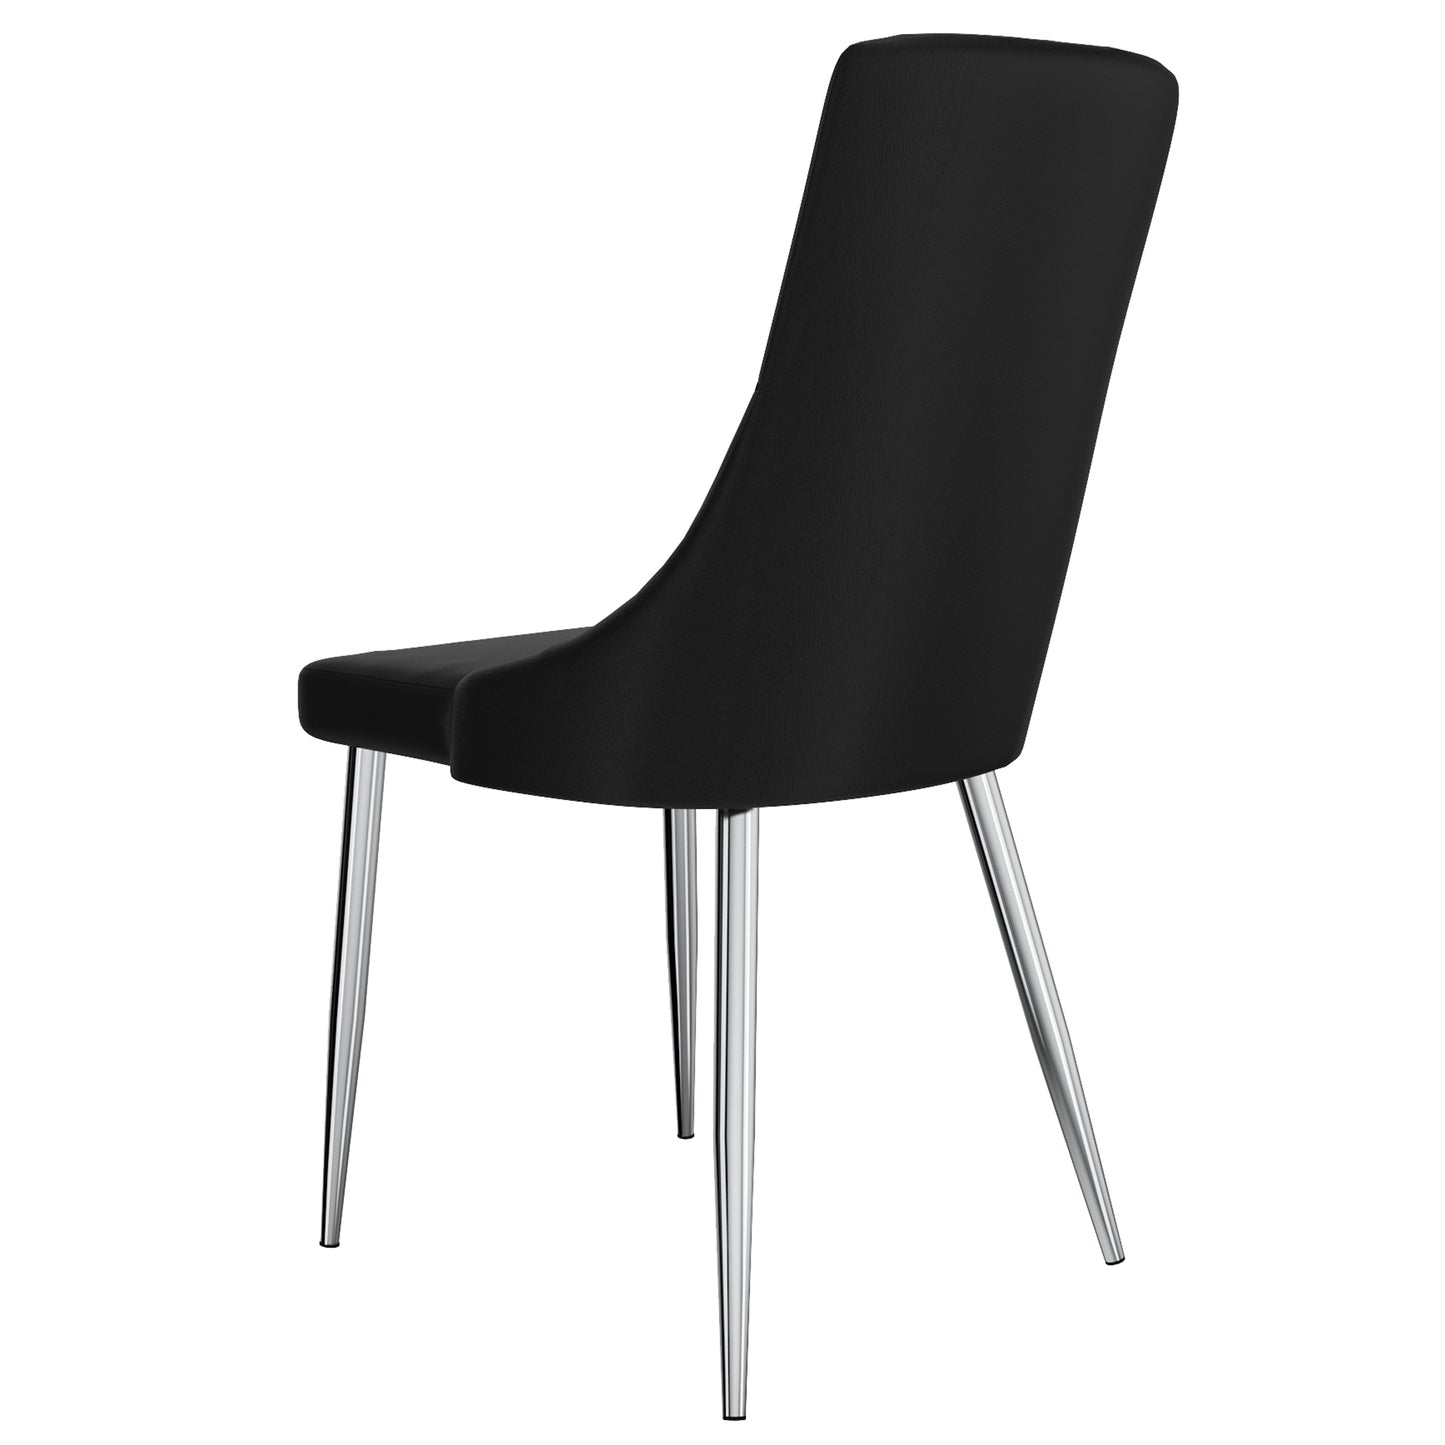 (DEVO BLACK- 2 PACK)- LEATHER DINING CHAIRS